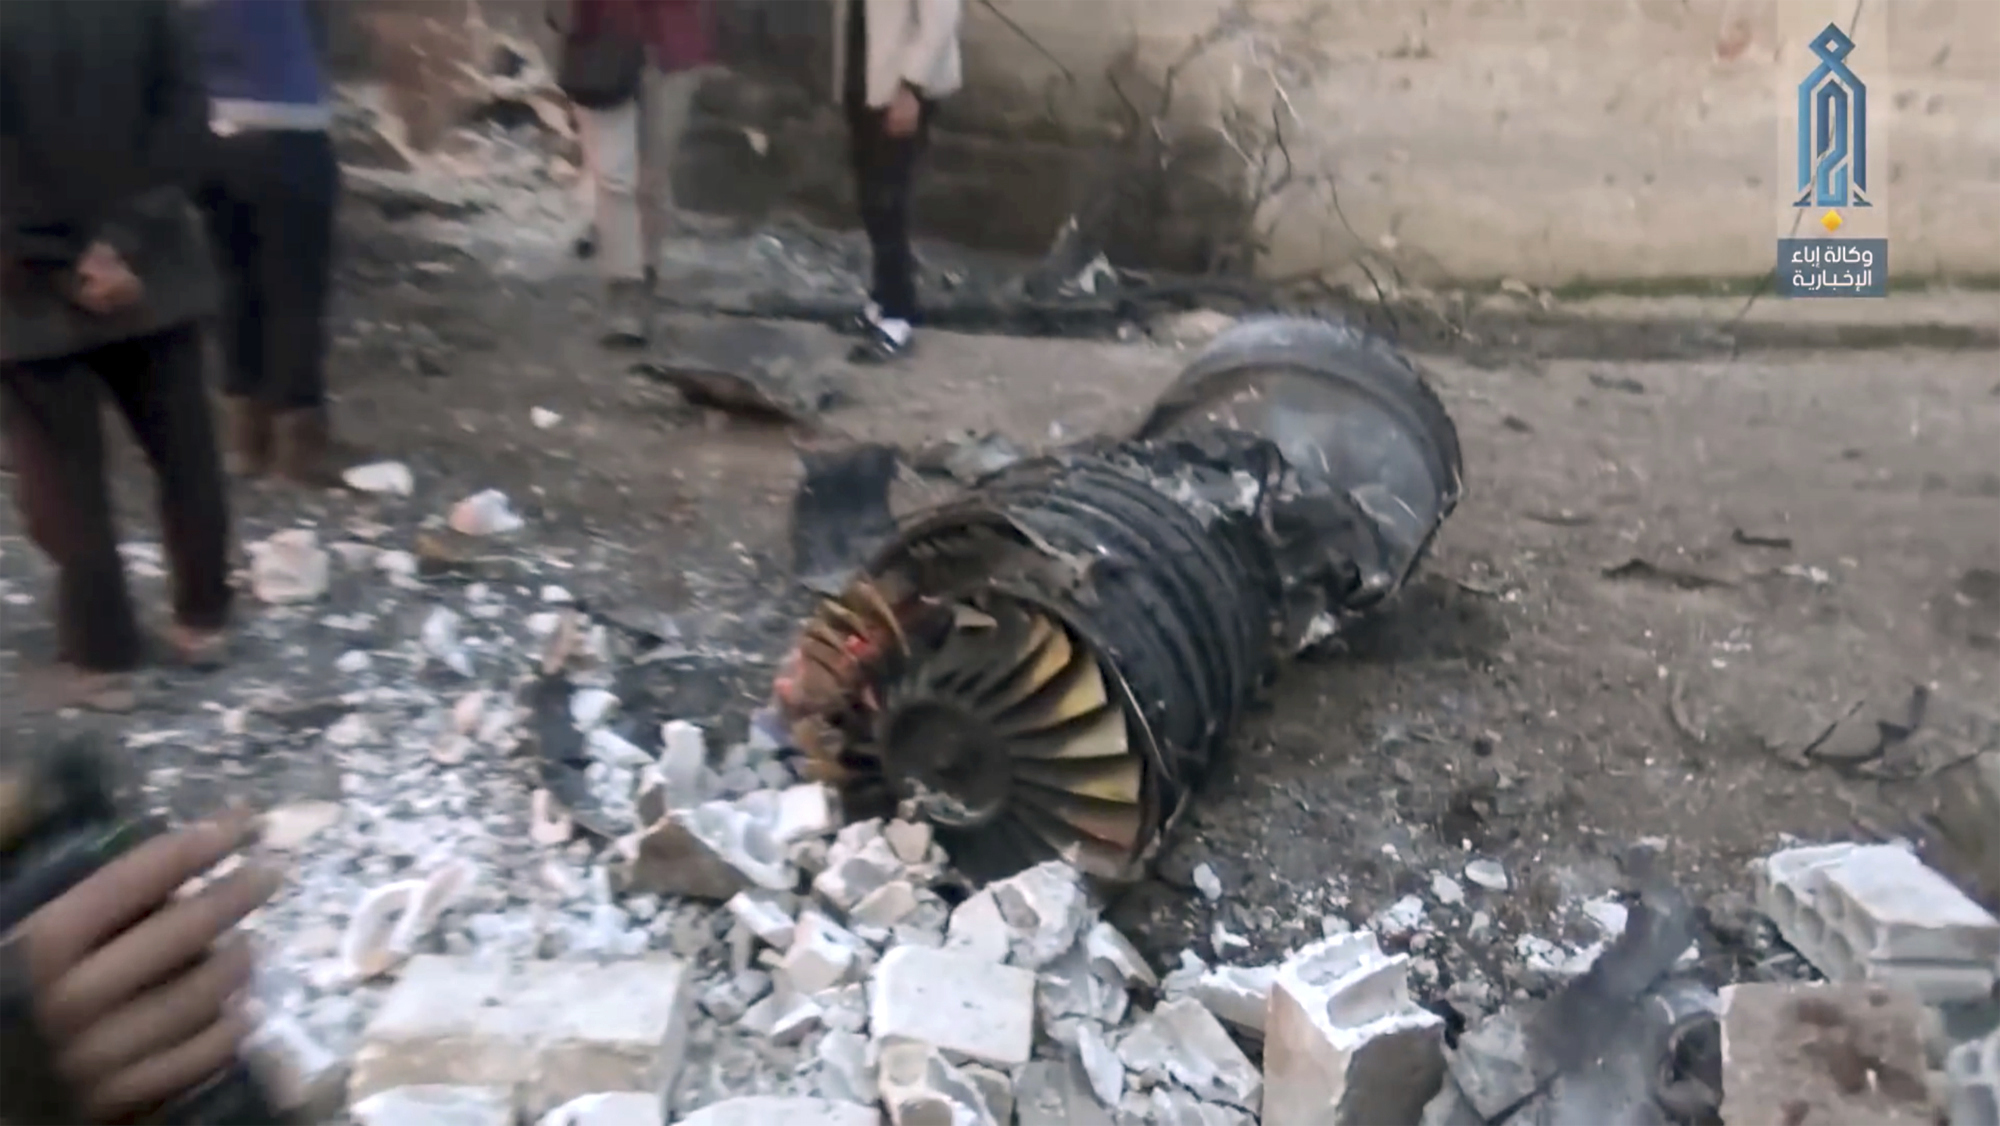 Part of a Russian plane that was shot down by rebel fighters over Syria (Ibaa News Agency via AP)